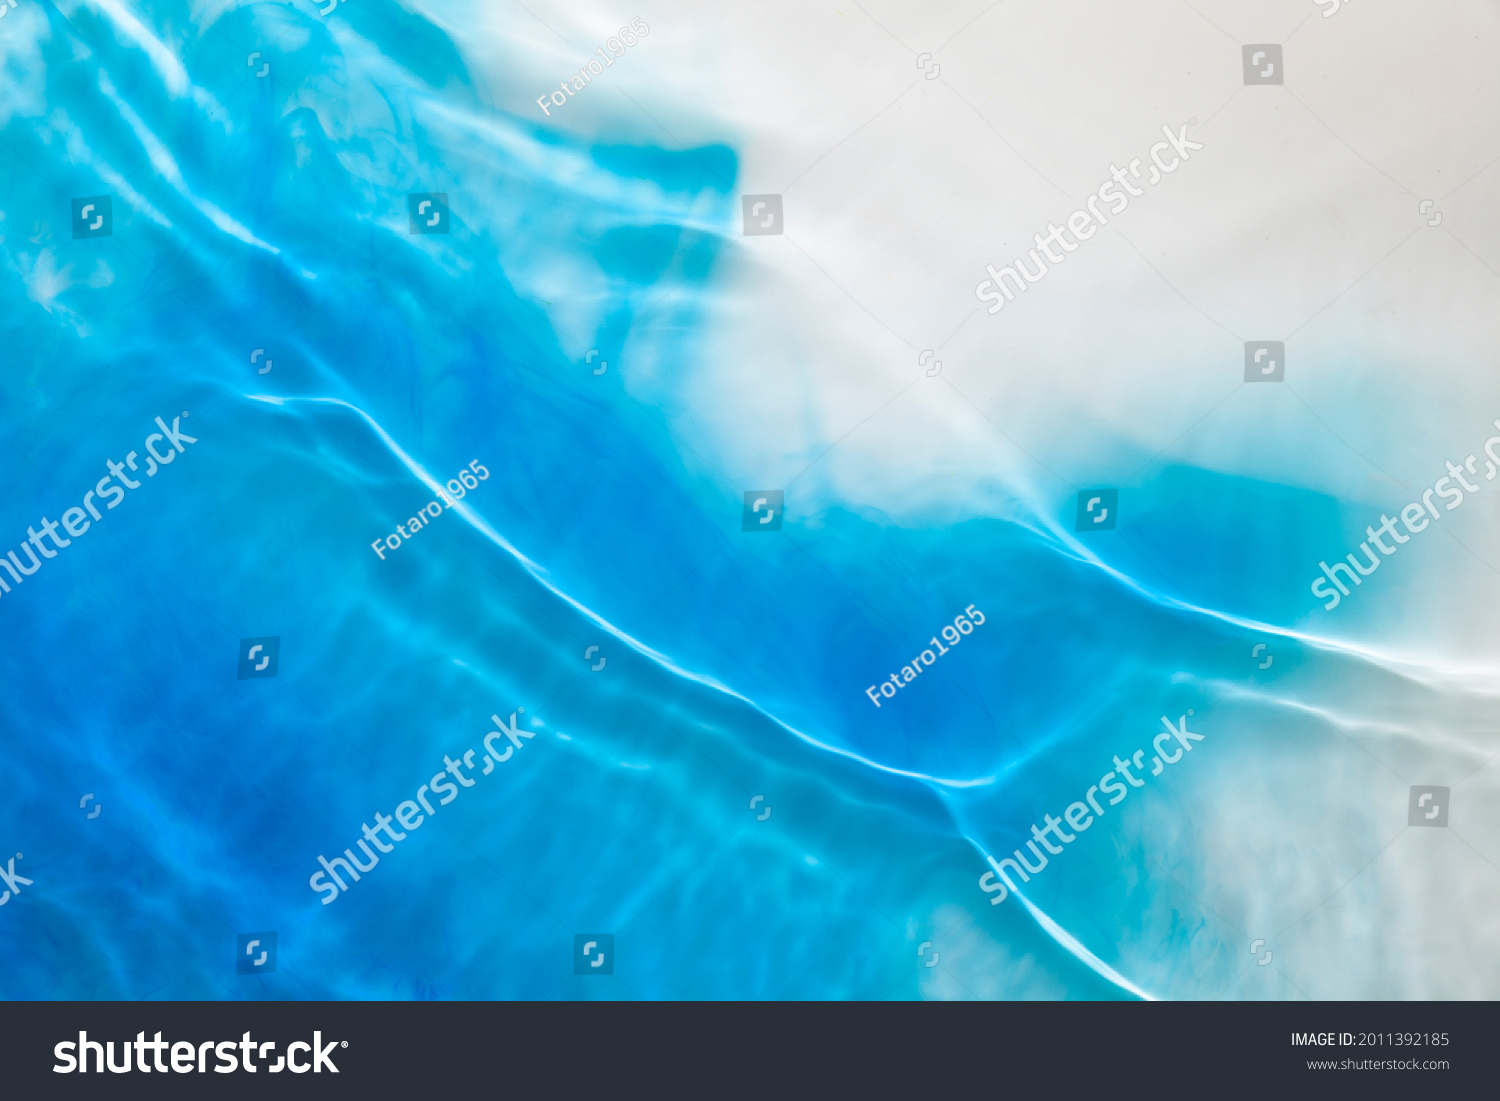 6,770 Colored emulsion Stock Photos, Images & Photography | Shutterstock